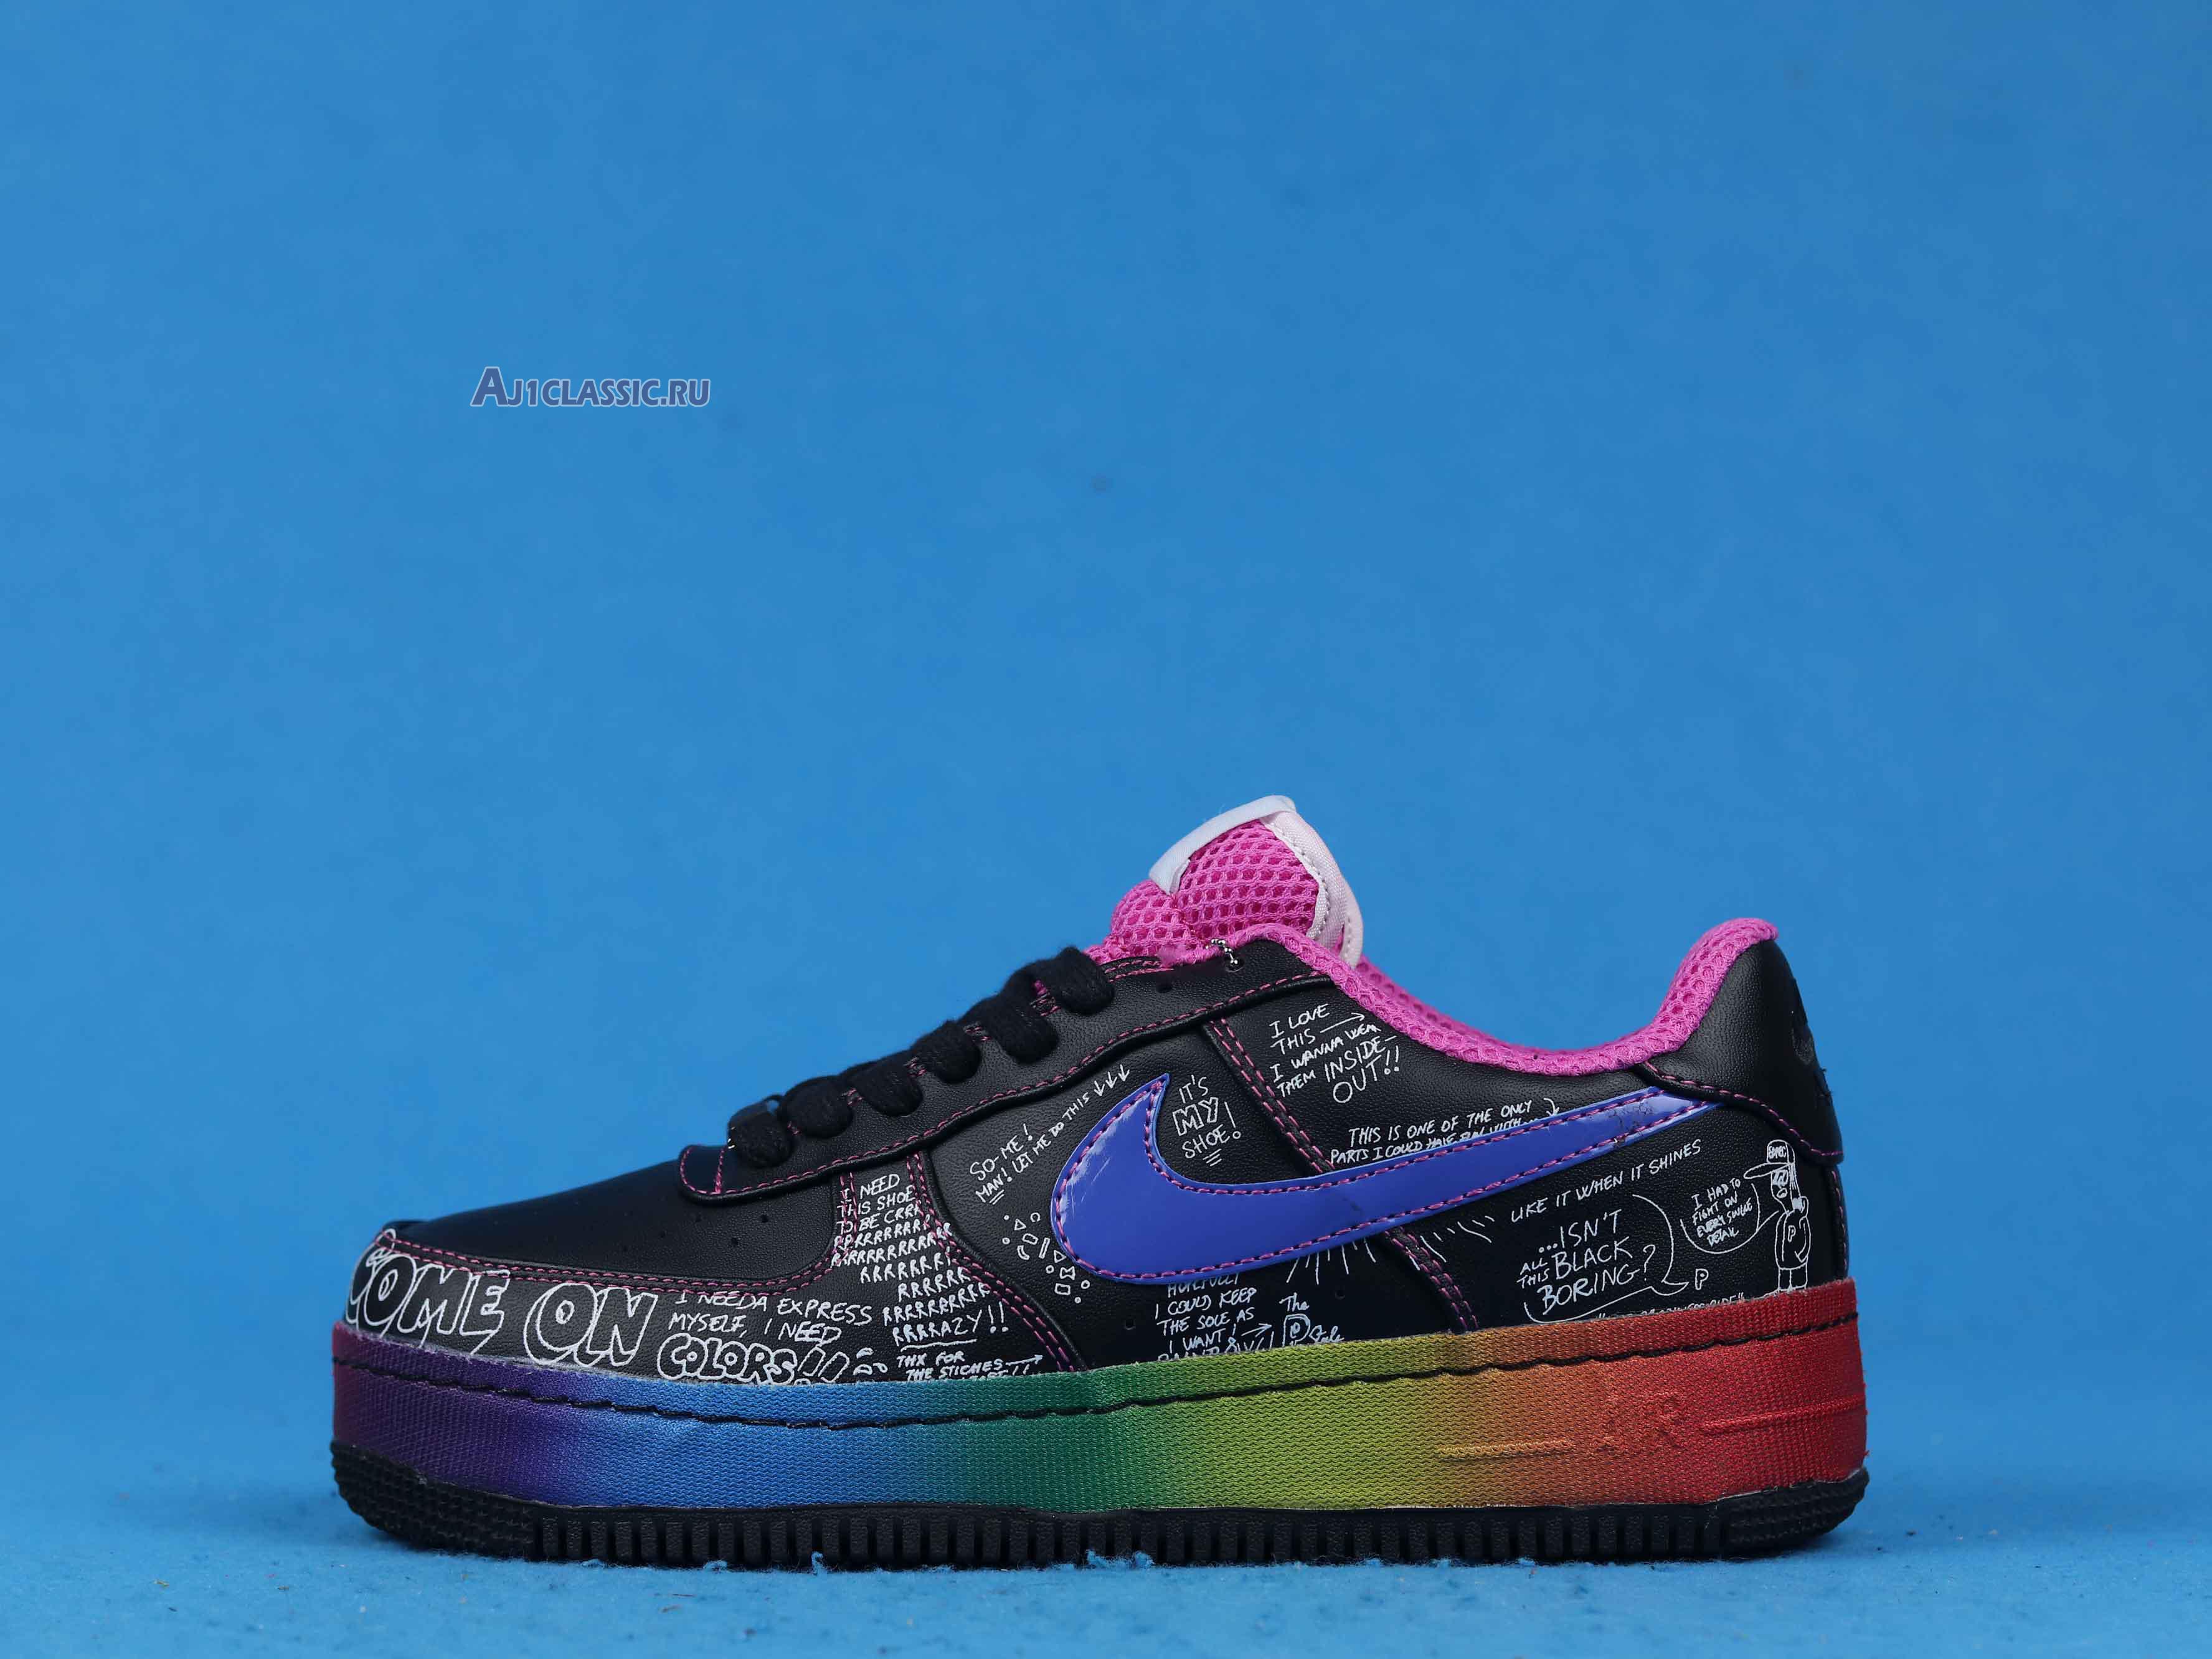 Nike Colette x Air Force 1 Low Supreme "Busy P" 318985-041